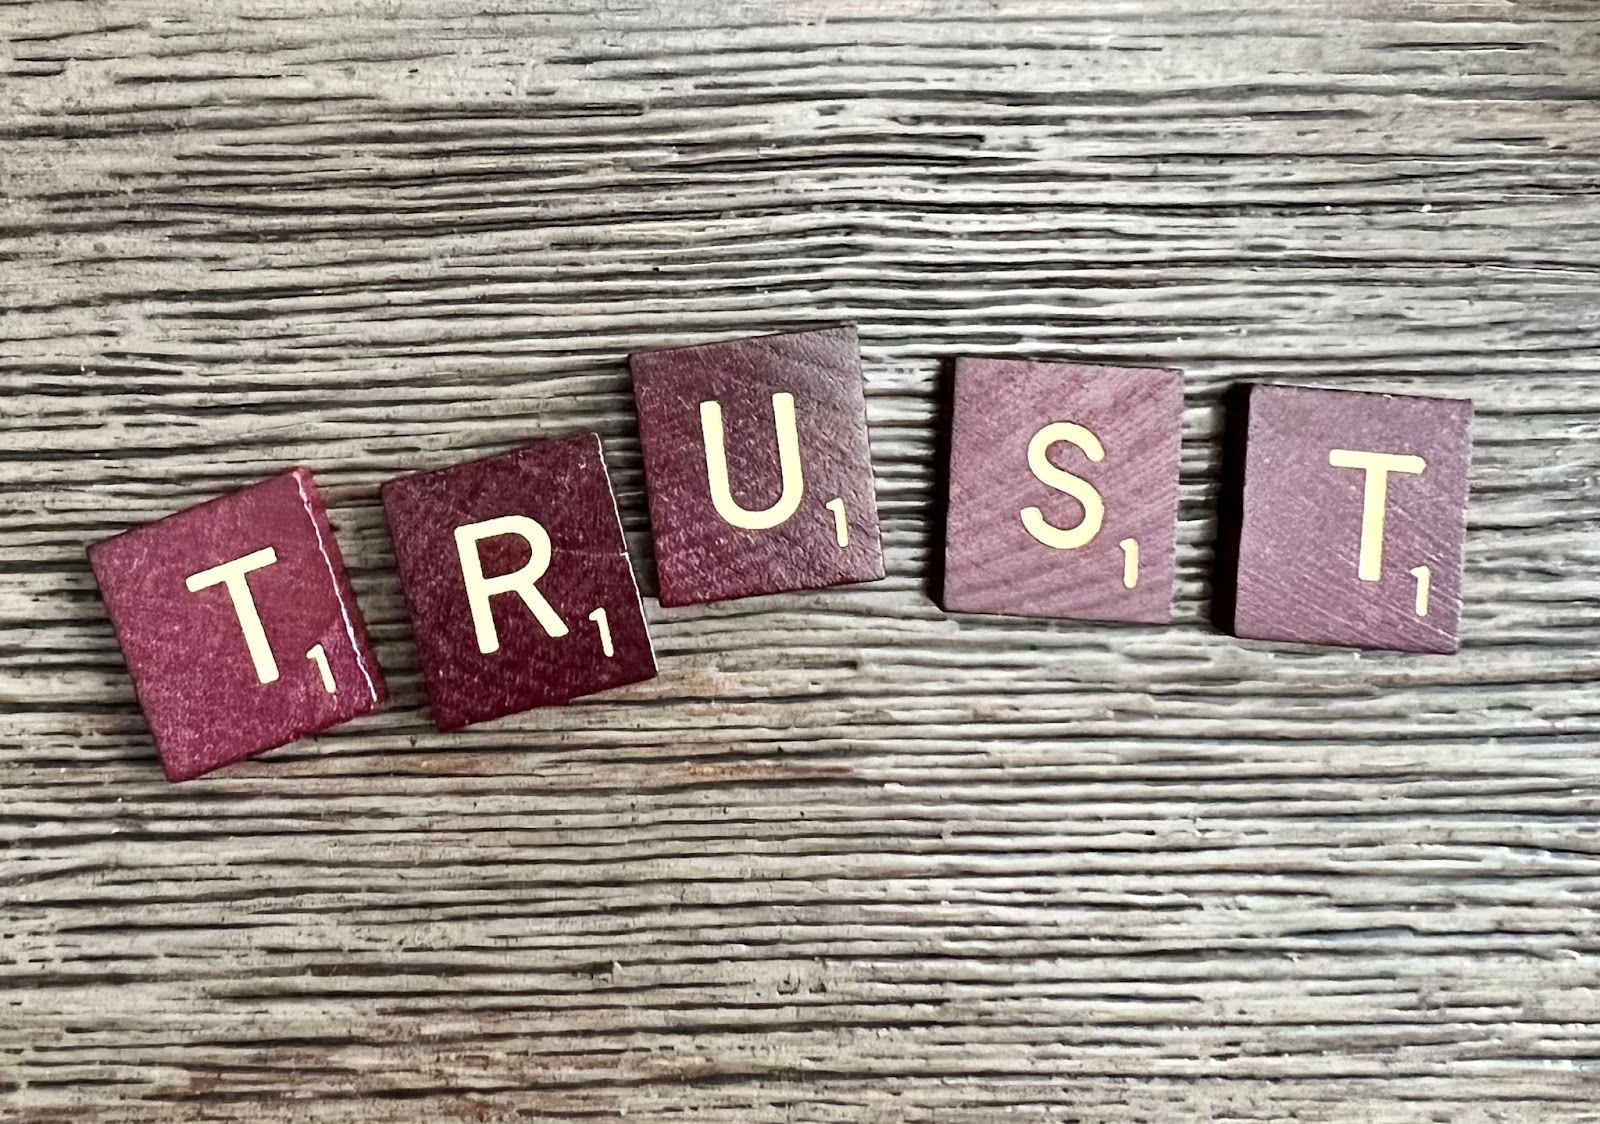 The pros and cons of good customer support: trust